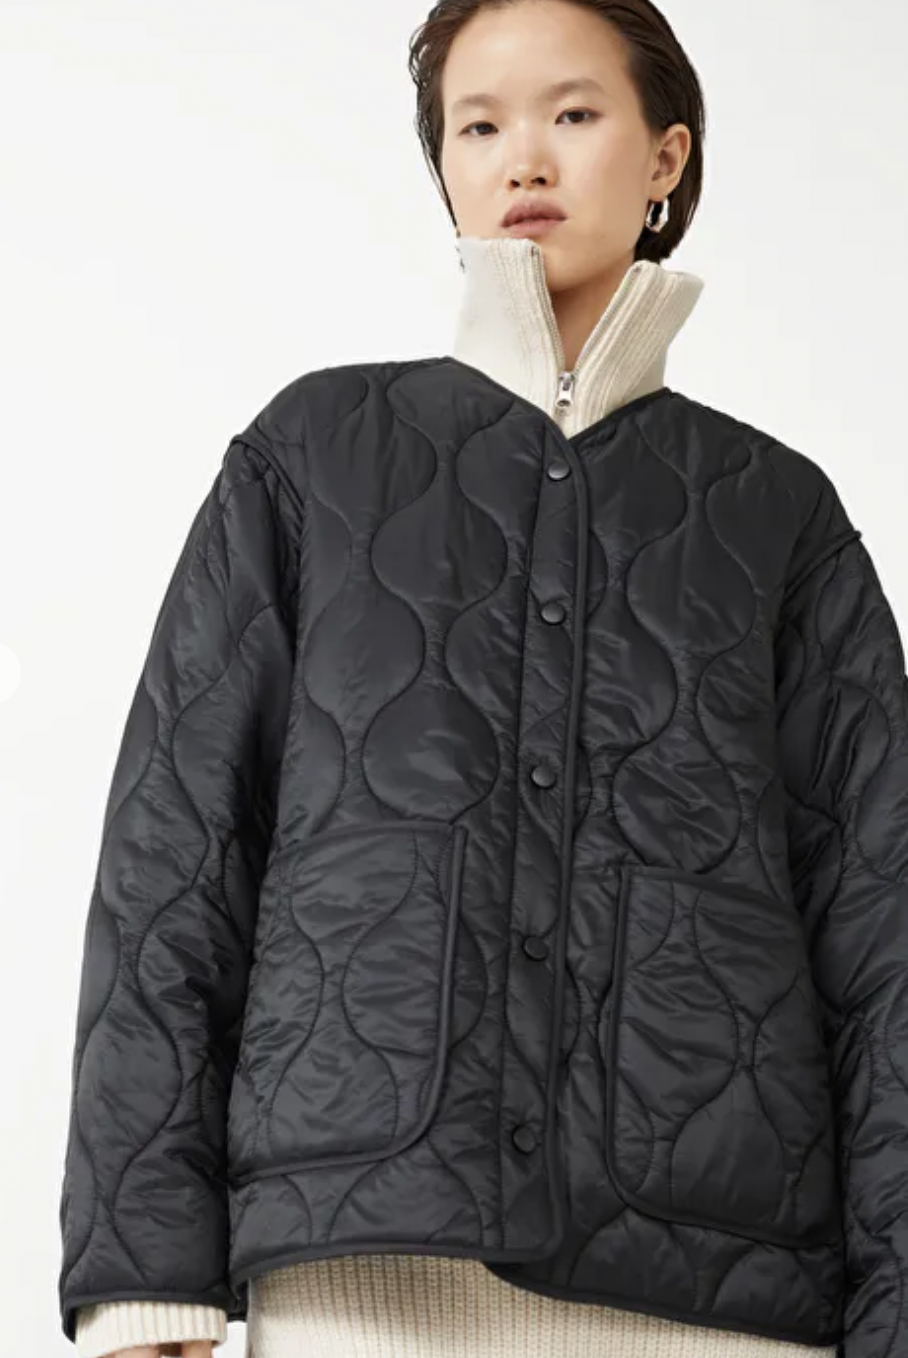 20 Best Quilted Jackets for Women 2023 - Warm, Stylish Quilted Jackets